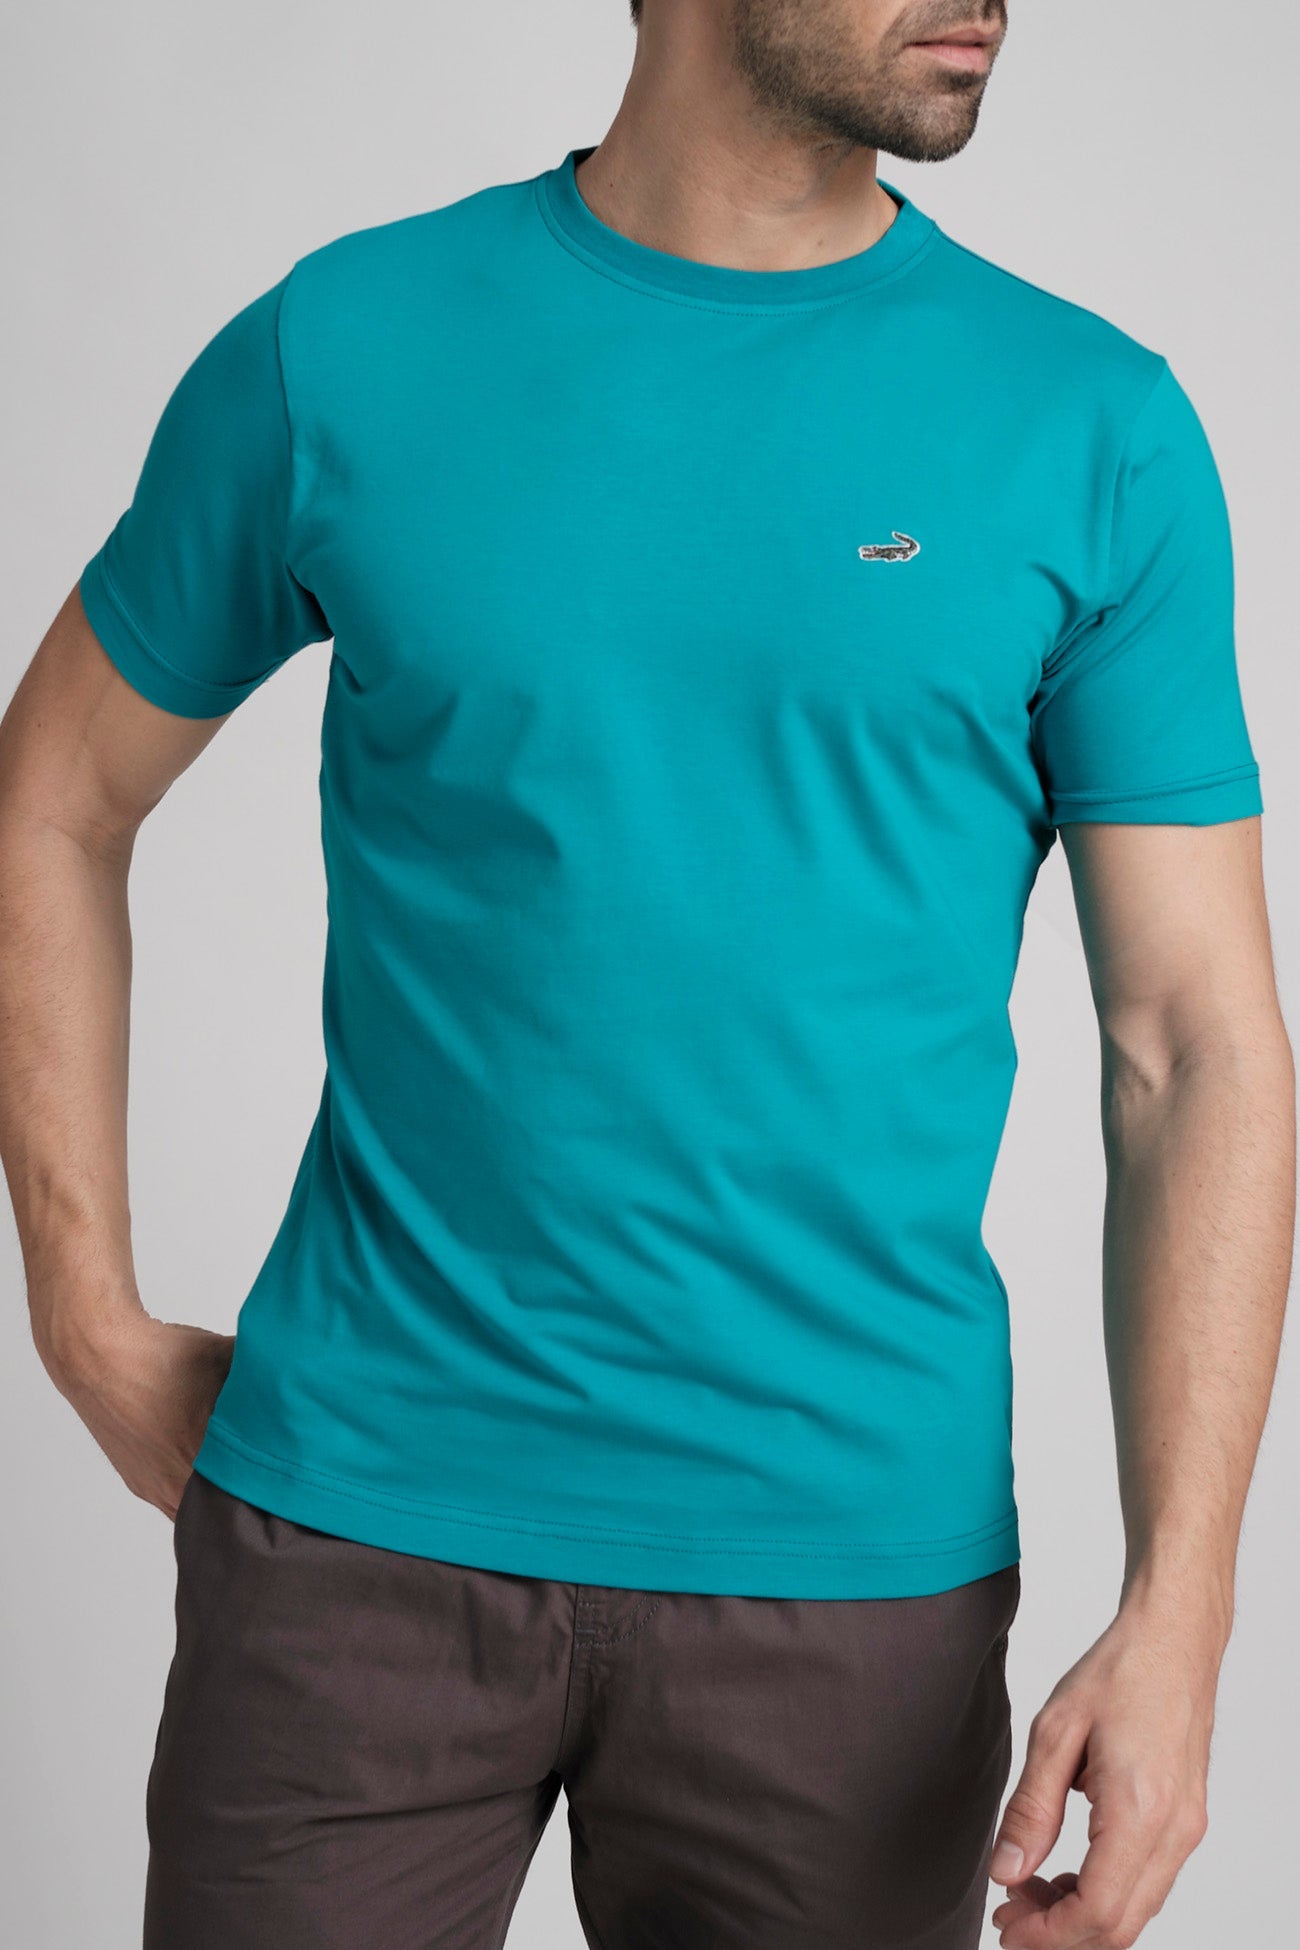 Single Jersey Verve Tee Action Fit - Blue Lake